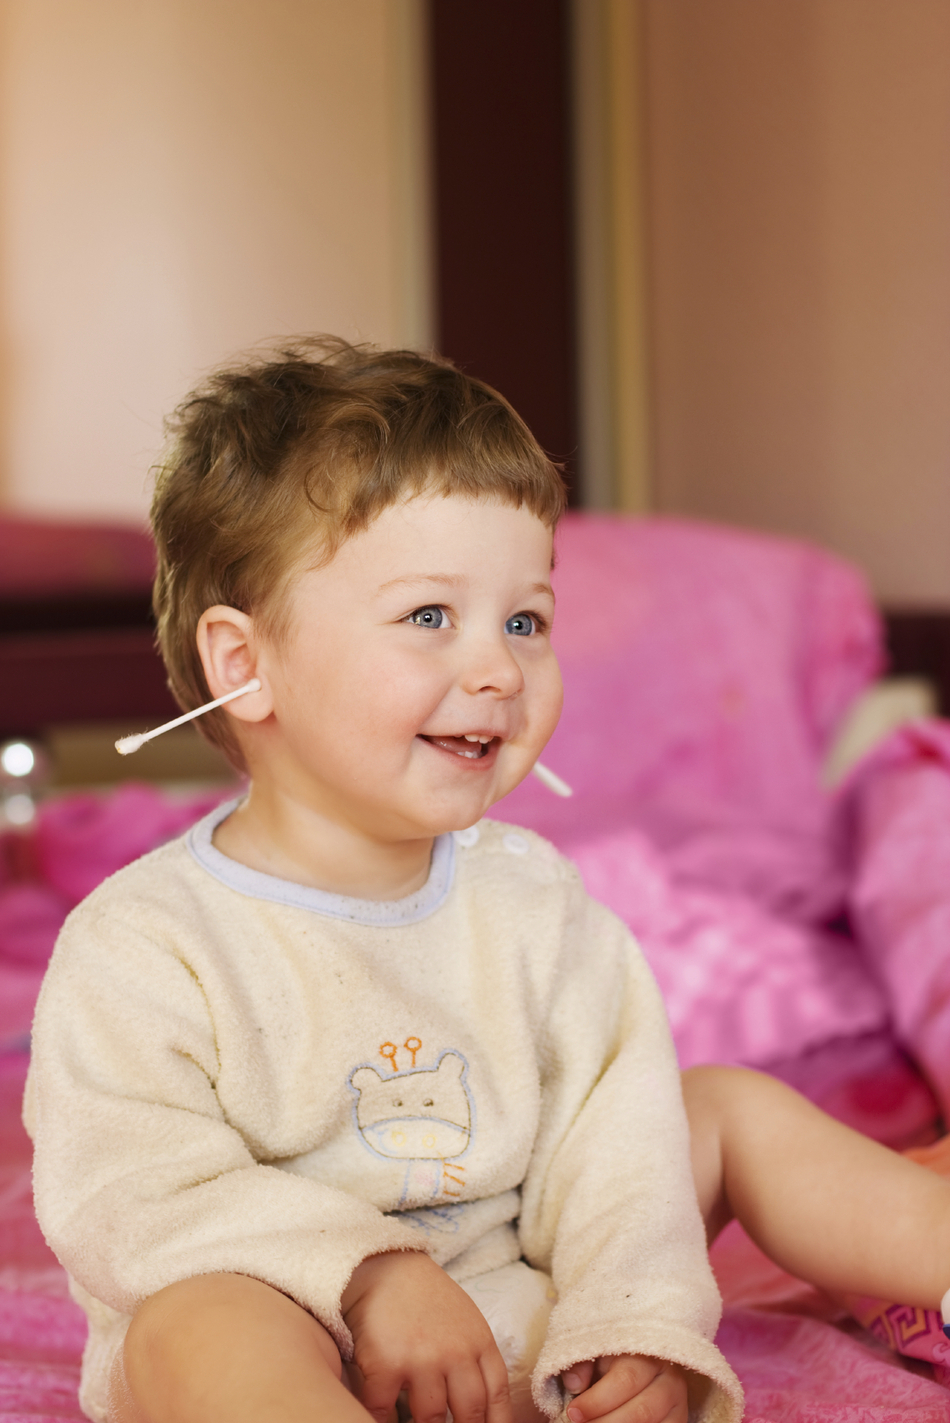 What to Do About Your Child's Earwax